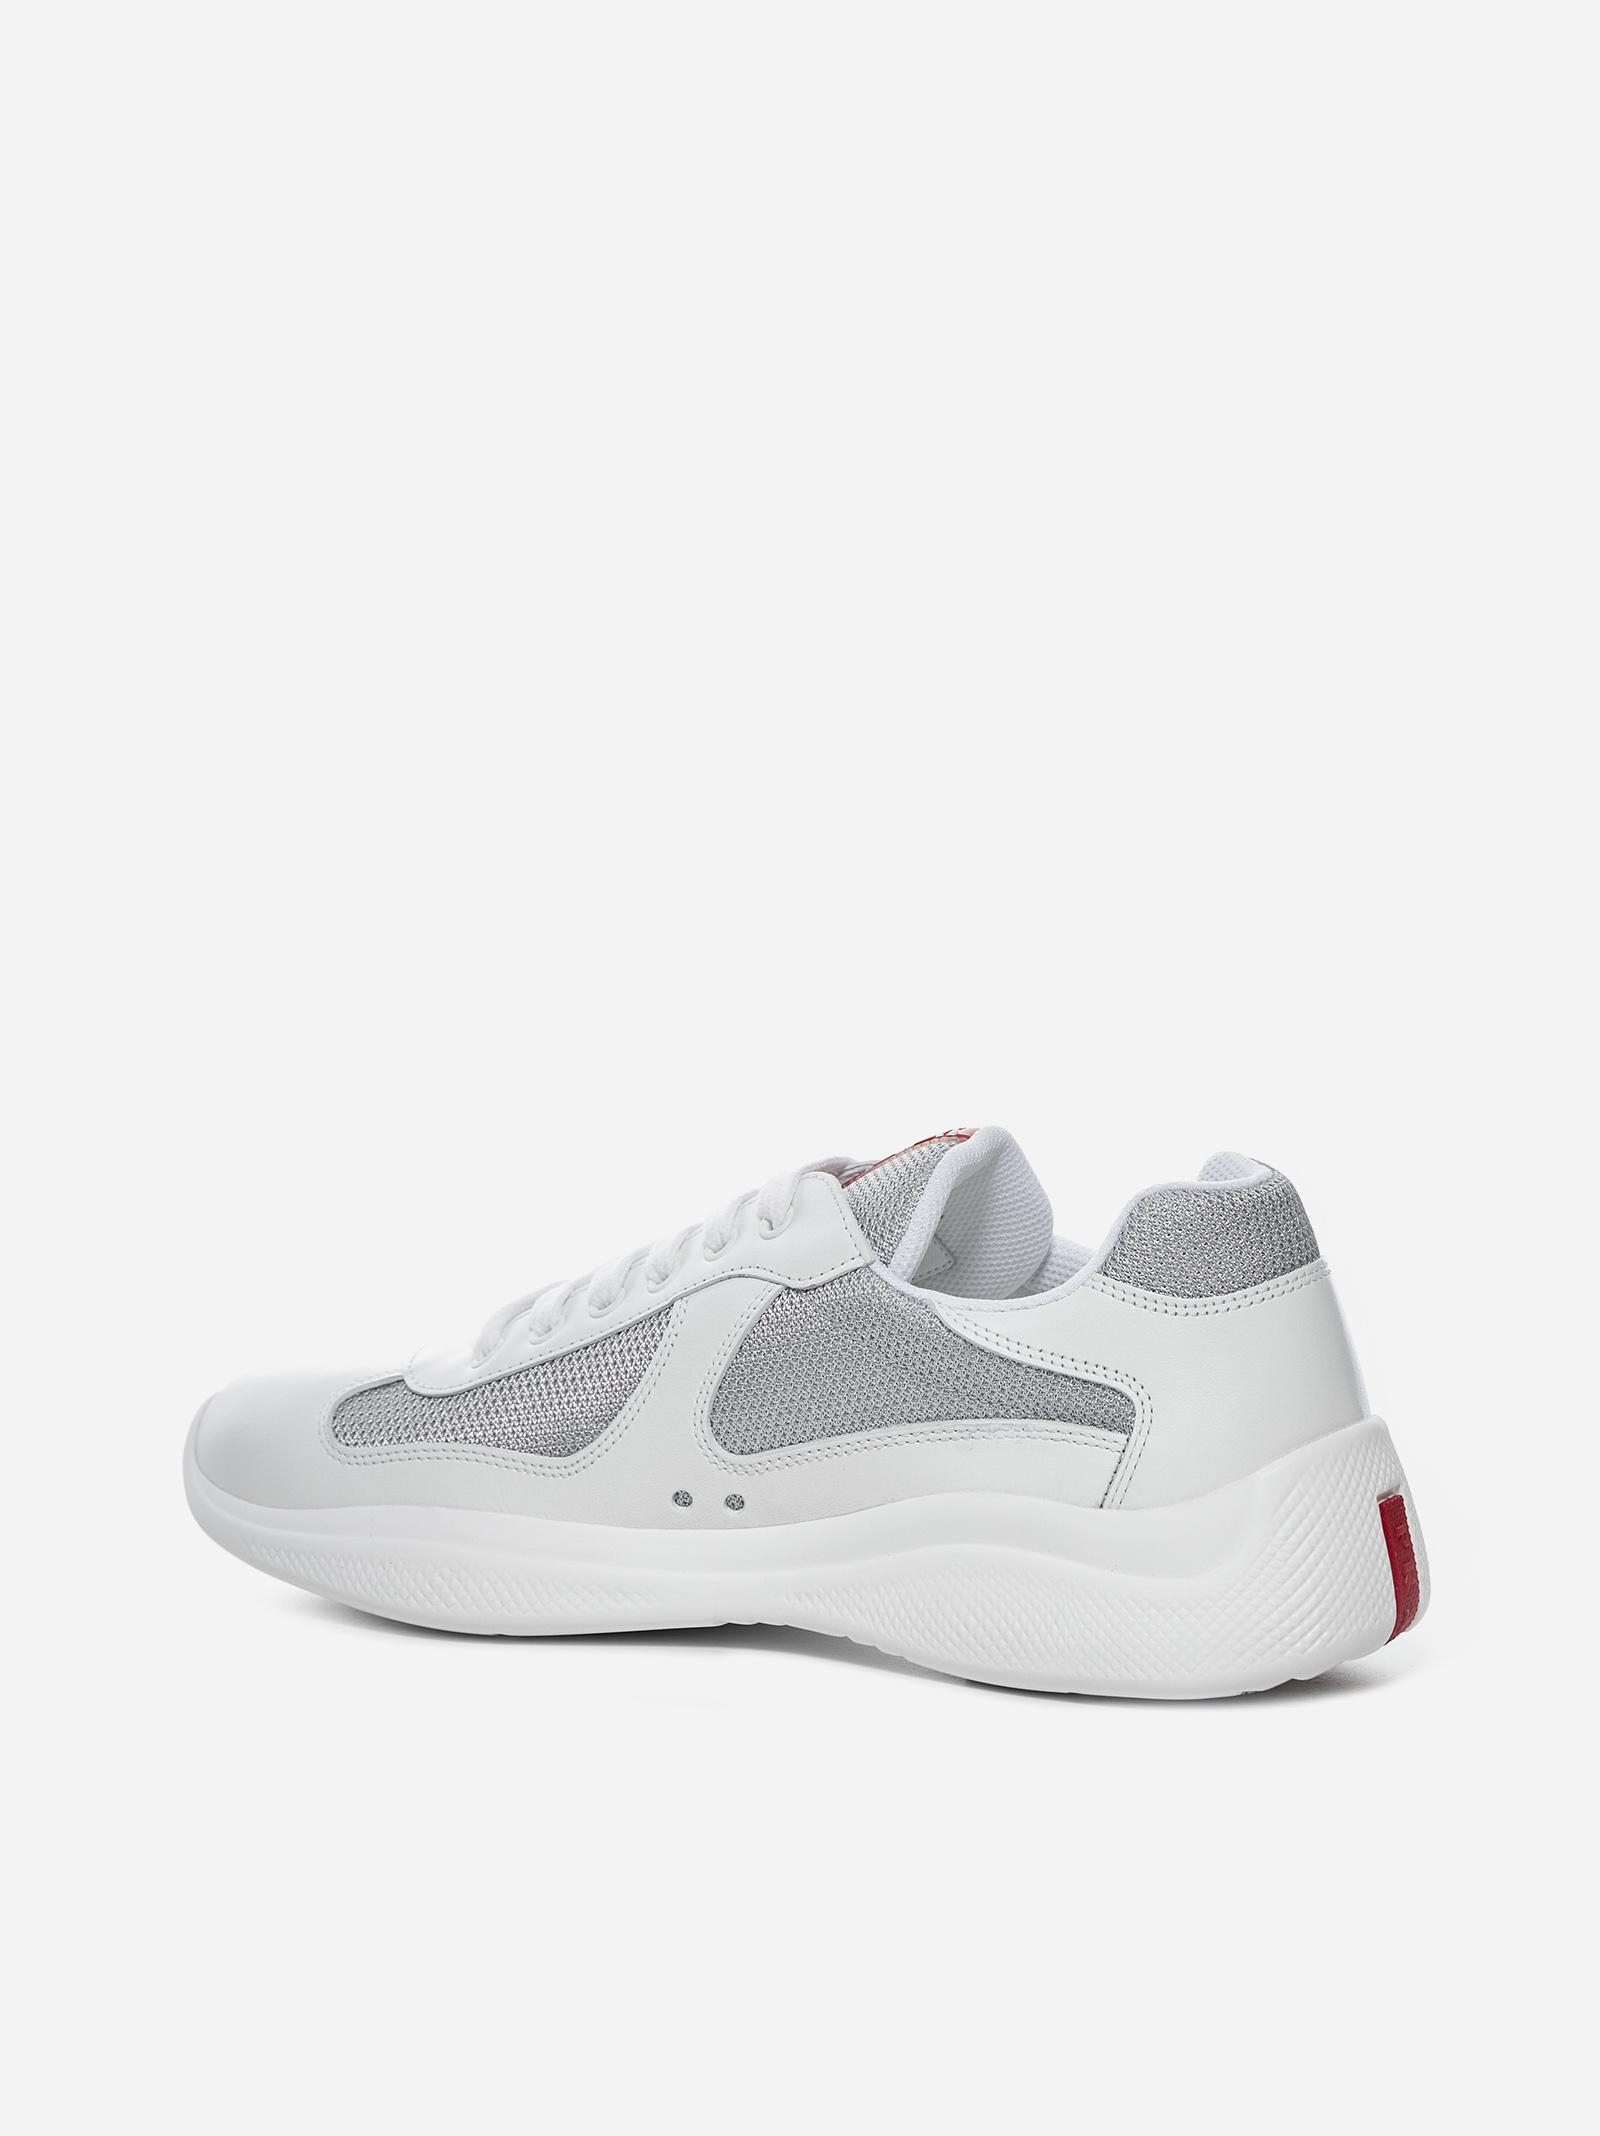 Prada America's Cup Leather And Fabric Sneakers in White | Lyst